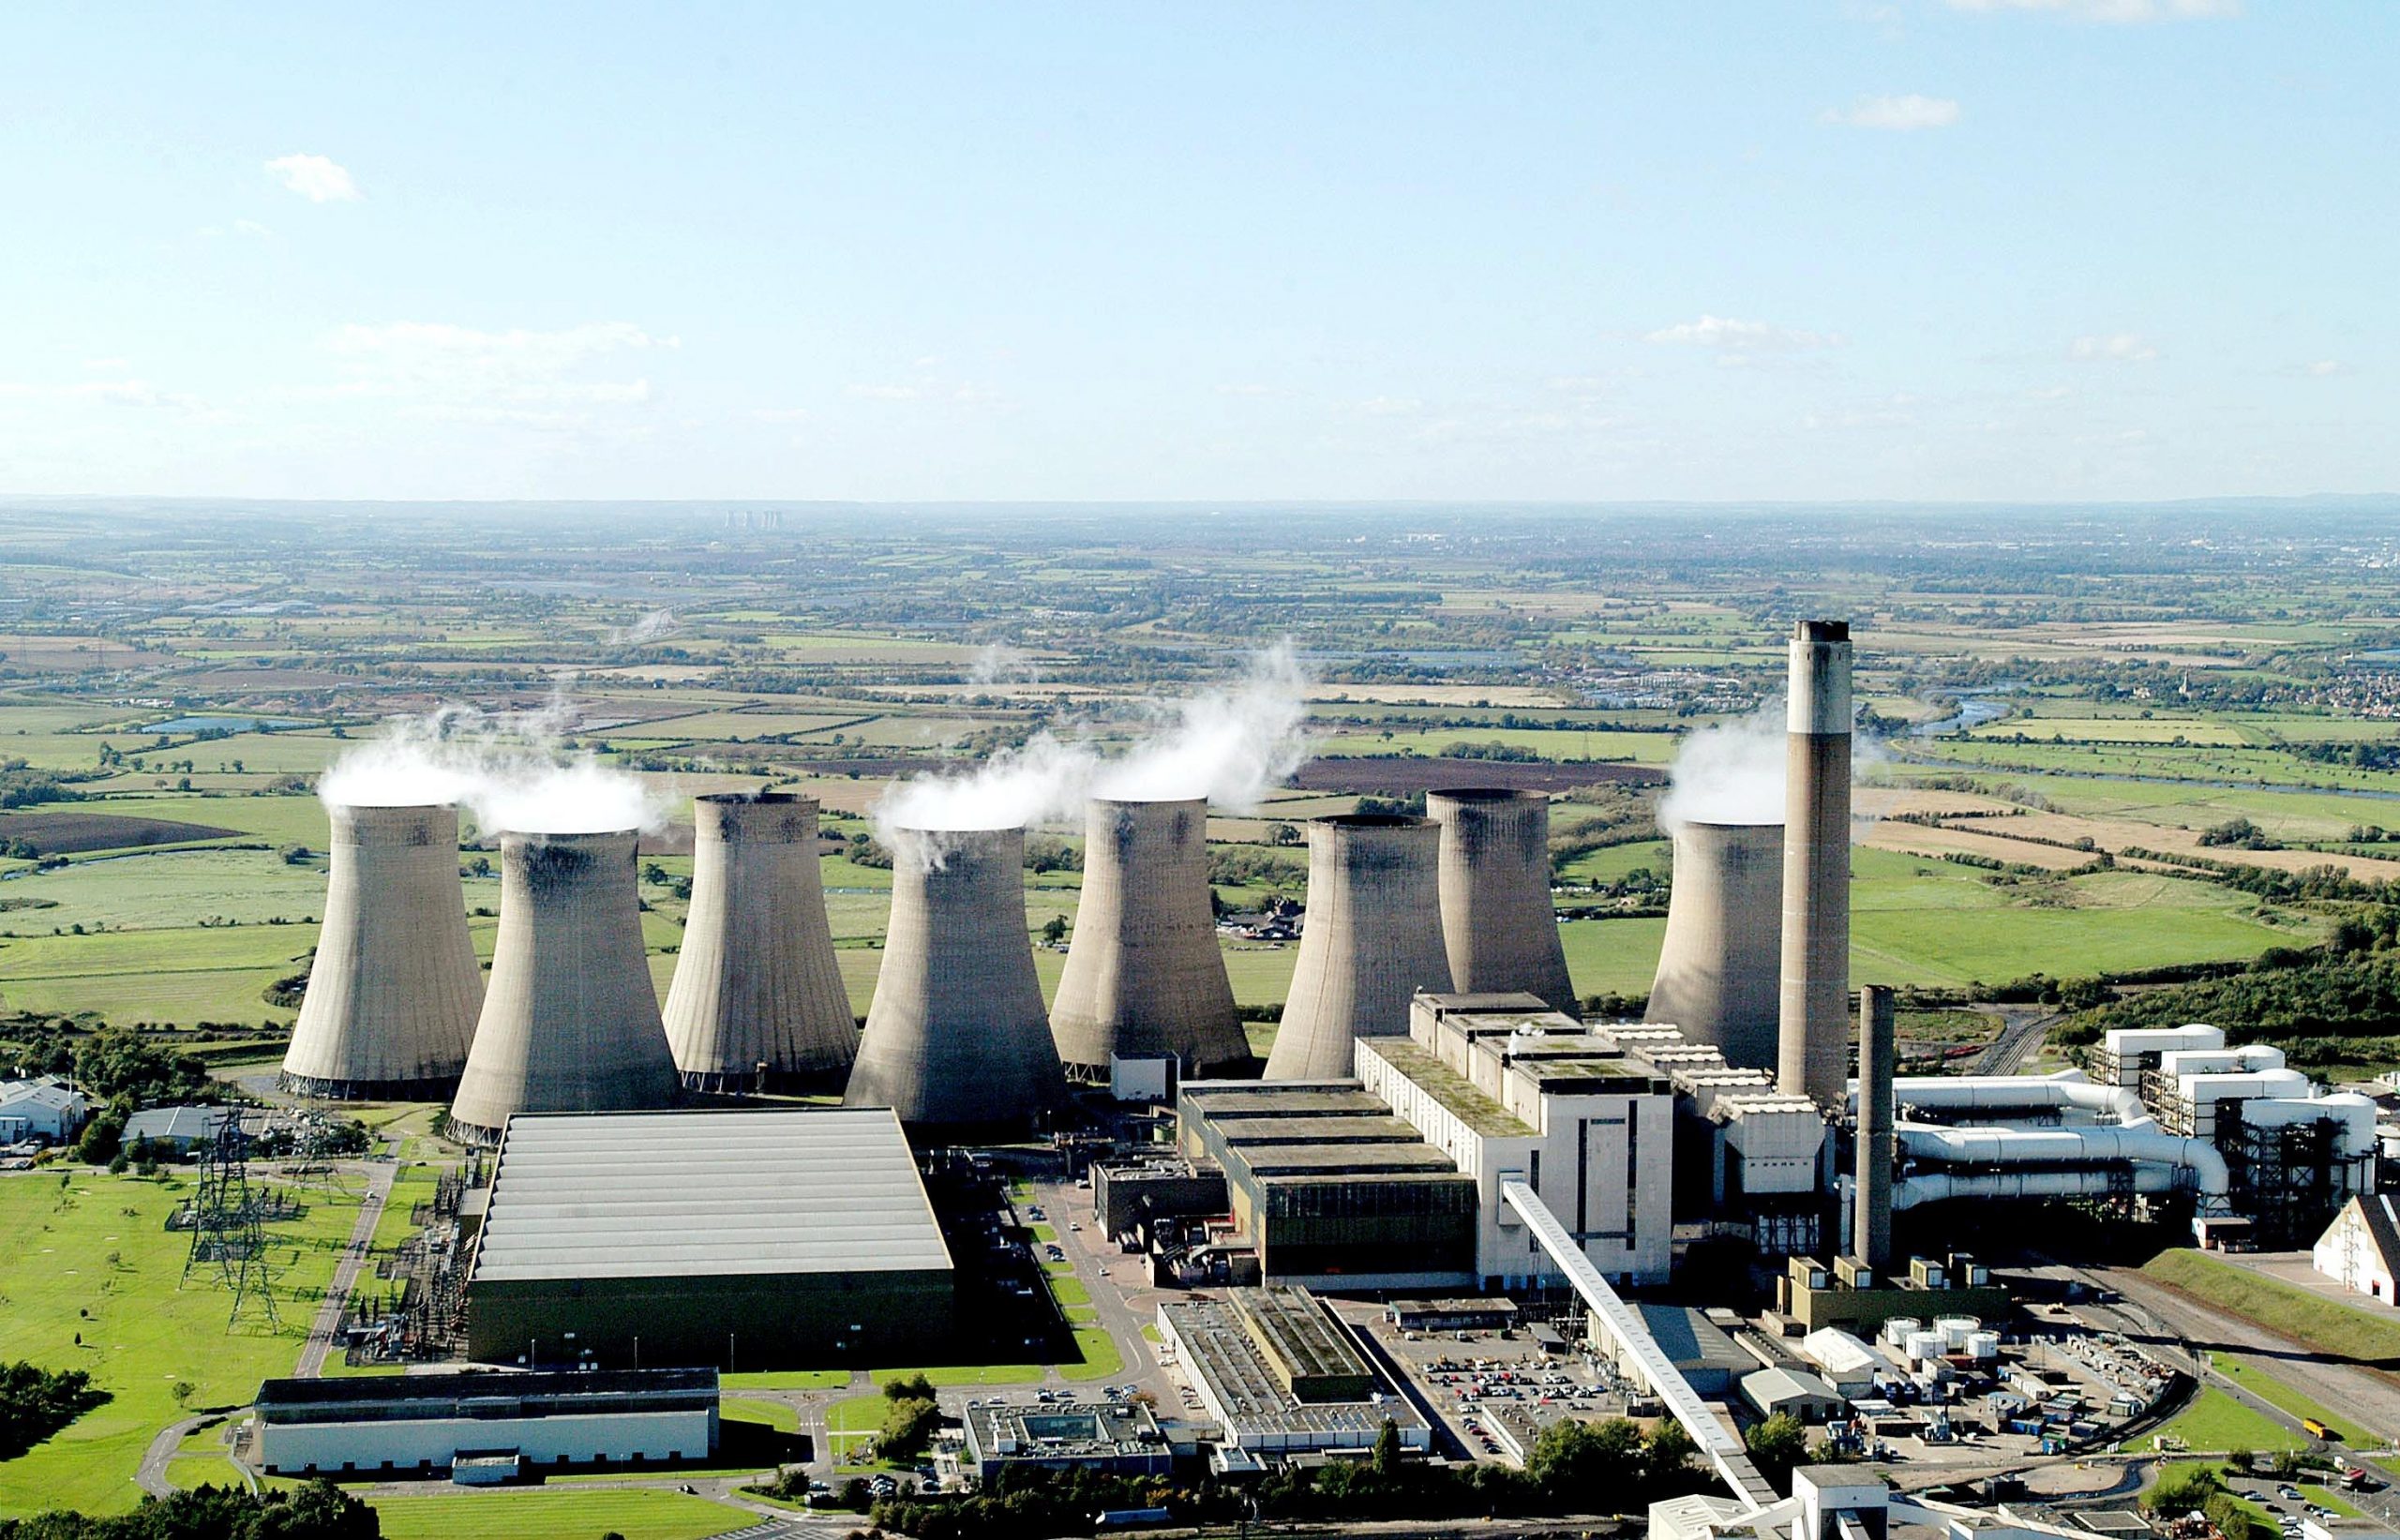 Have your say on Ratcliffe on Soar Power Station site in the consultation from Monday November 29 scaled